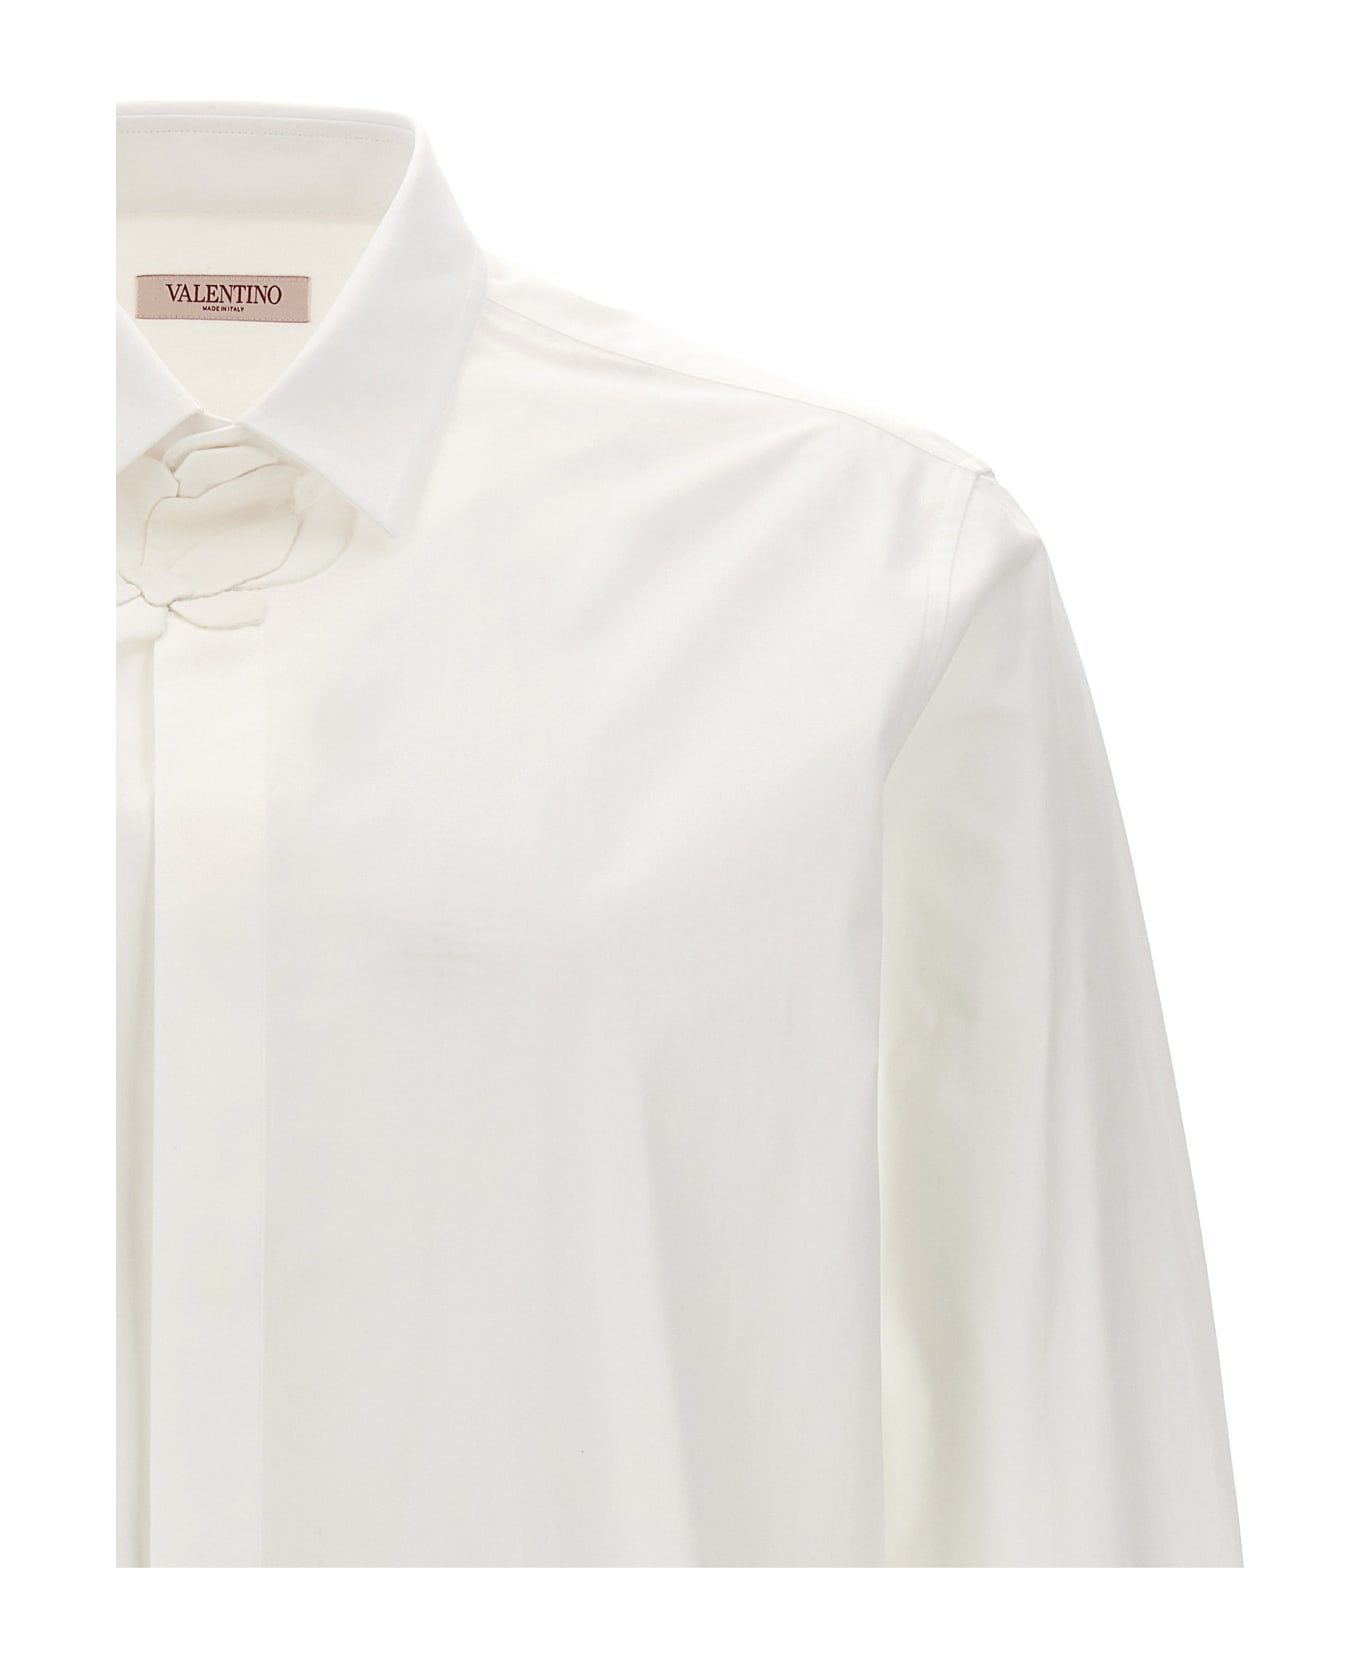 Valentino Shirt With Flower Patch - White シャツ